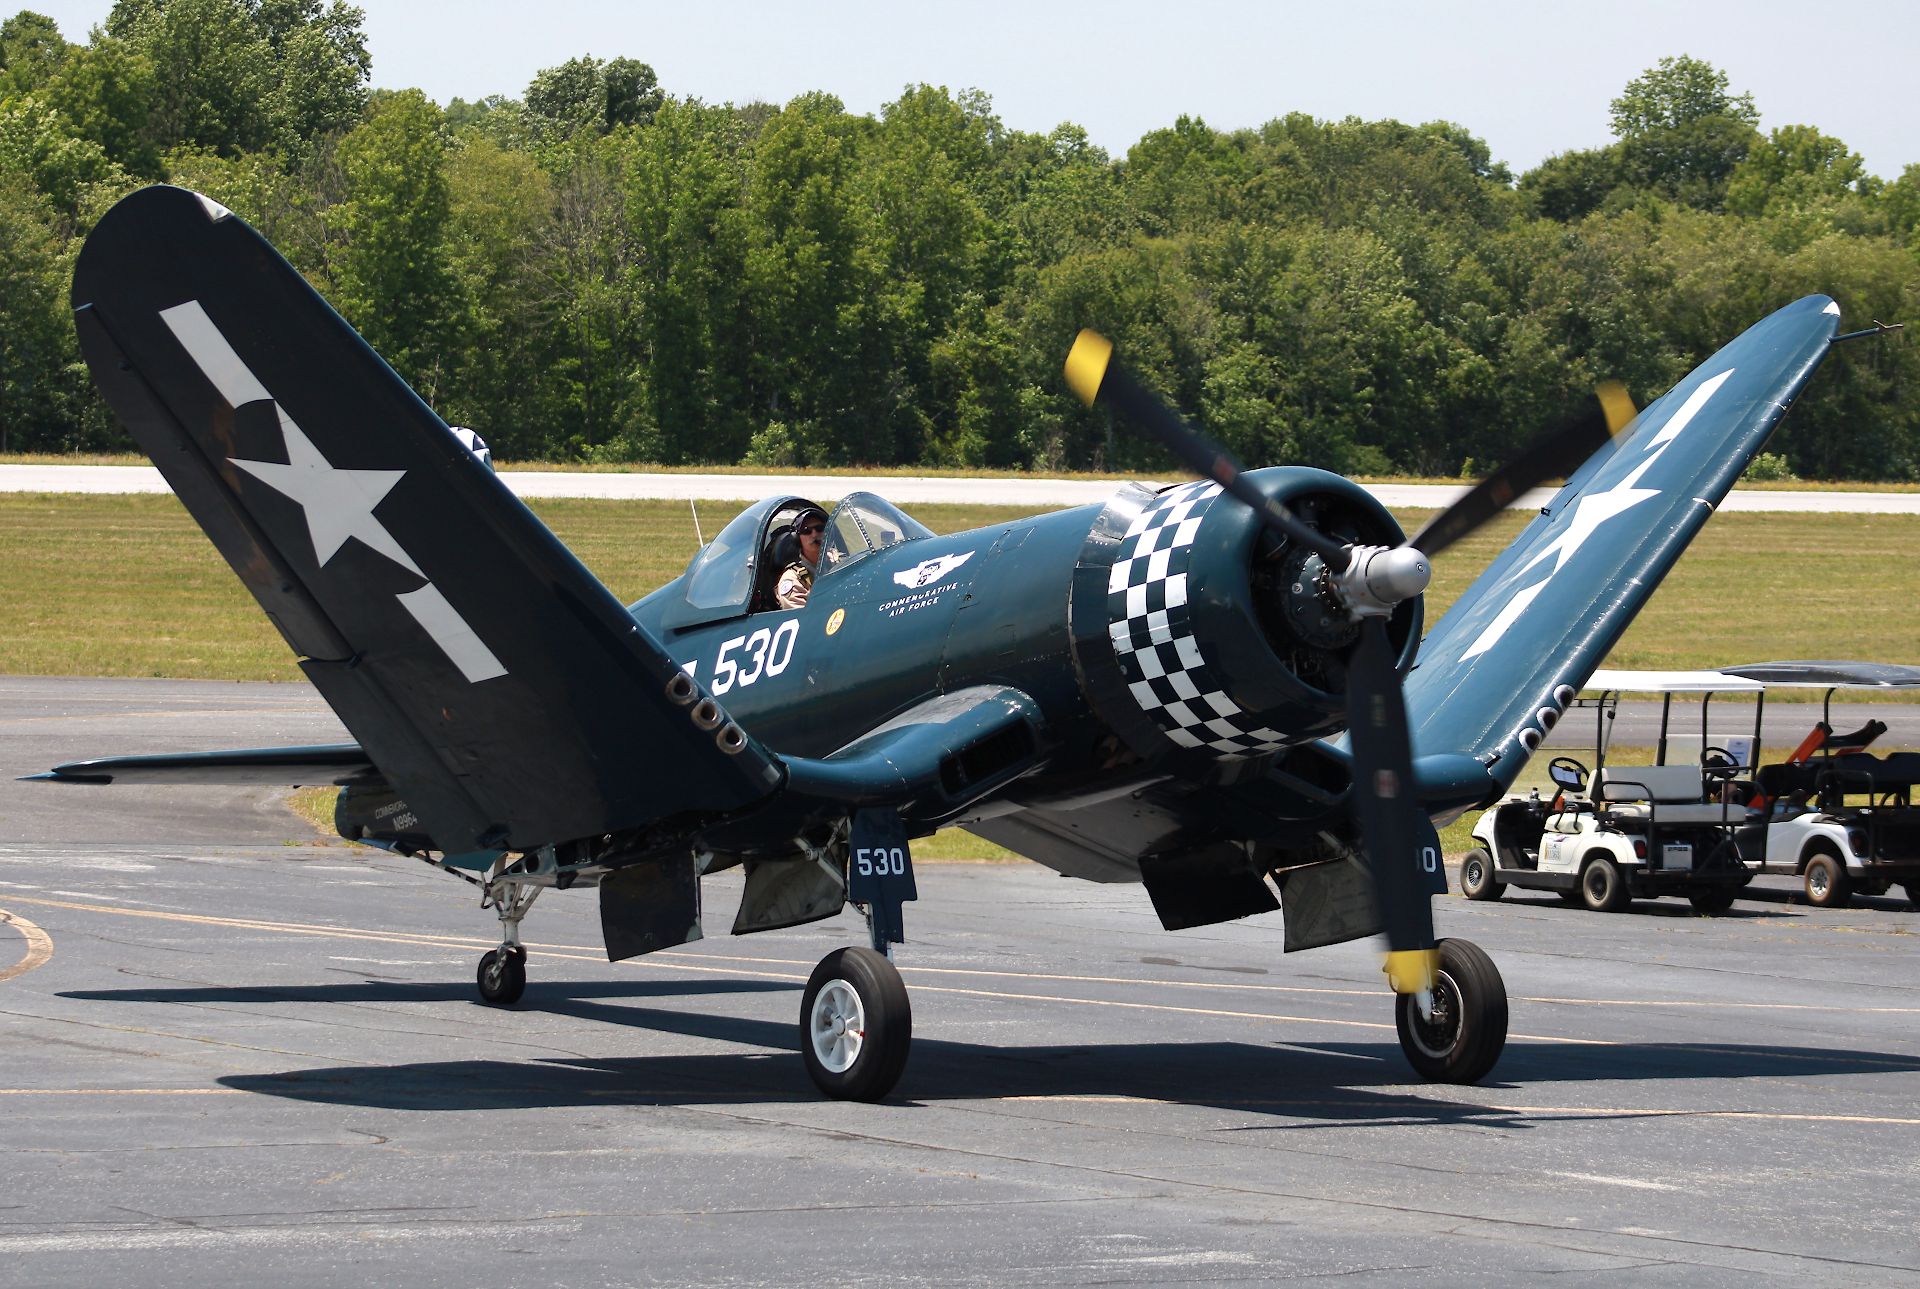 VOUGHT-SIKORSKY V-166 Corsair (N9964Z) - Wings were folding up while taxiing at the Atlanta Air Show 2021. Photo taken on 5/22/2021.